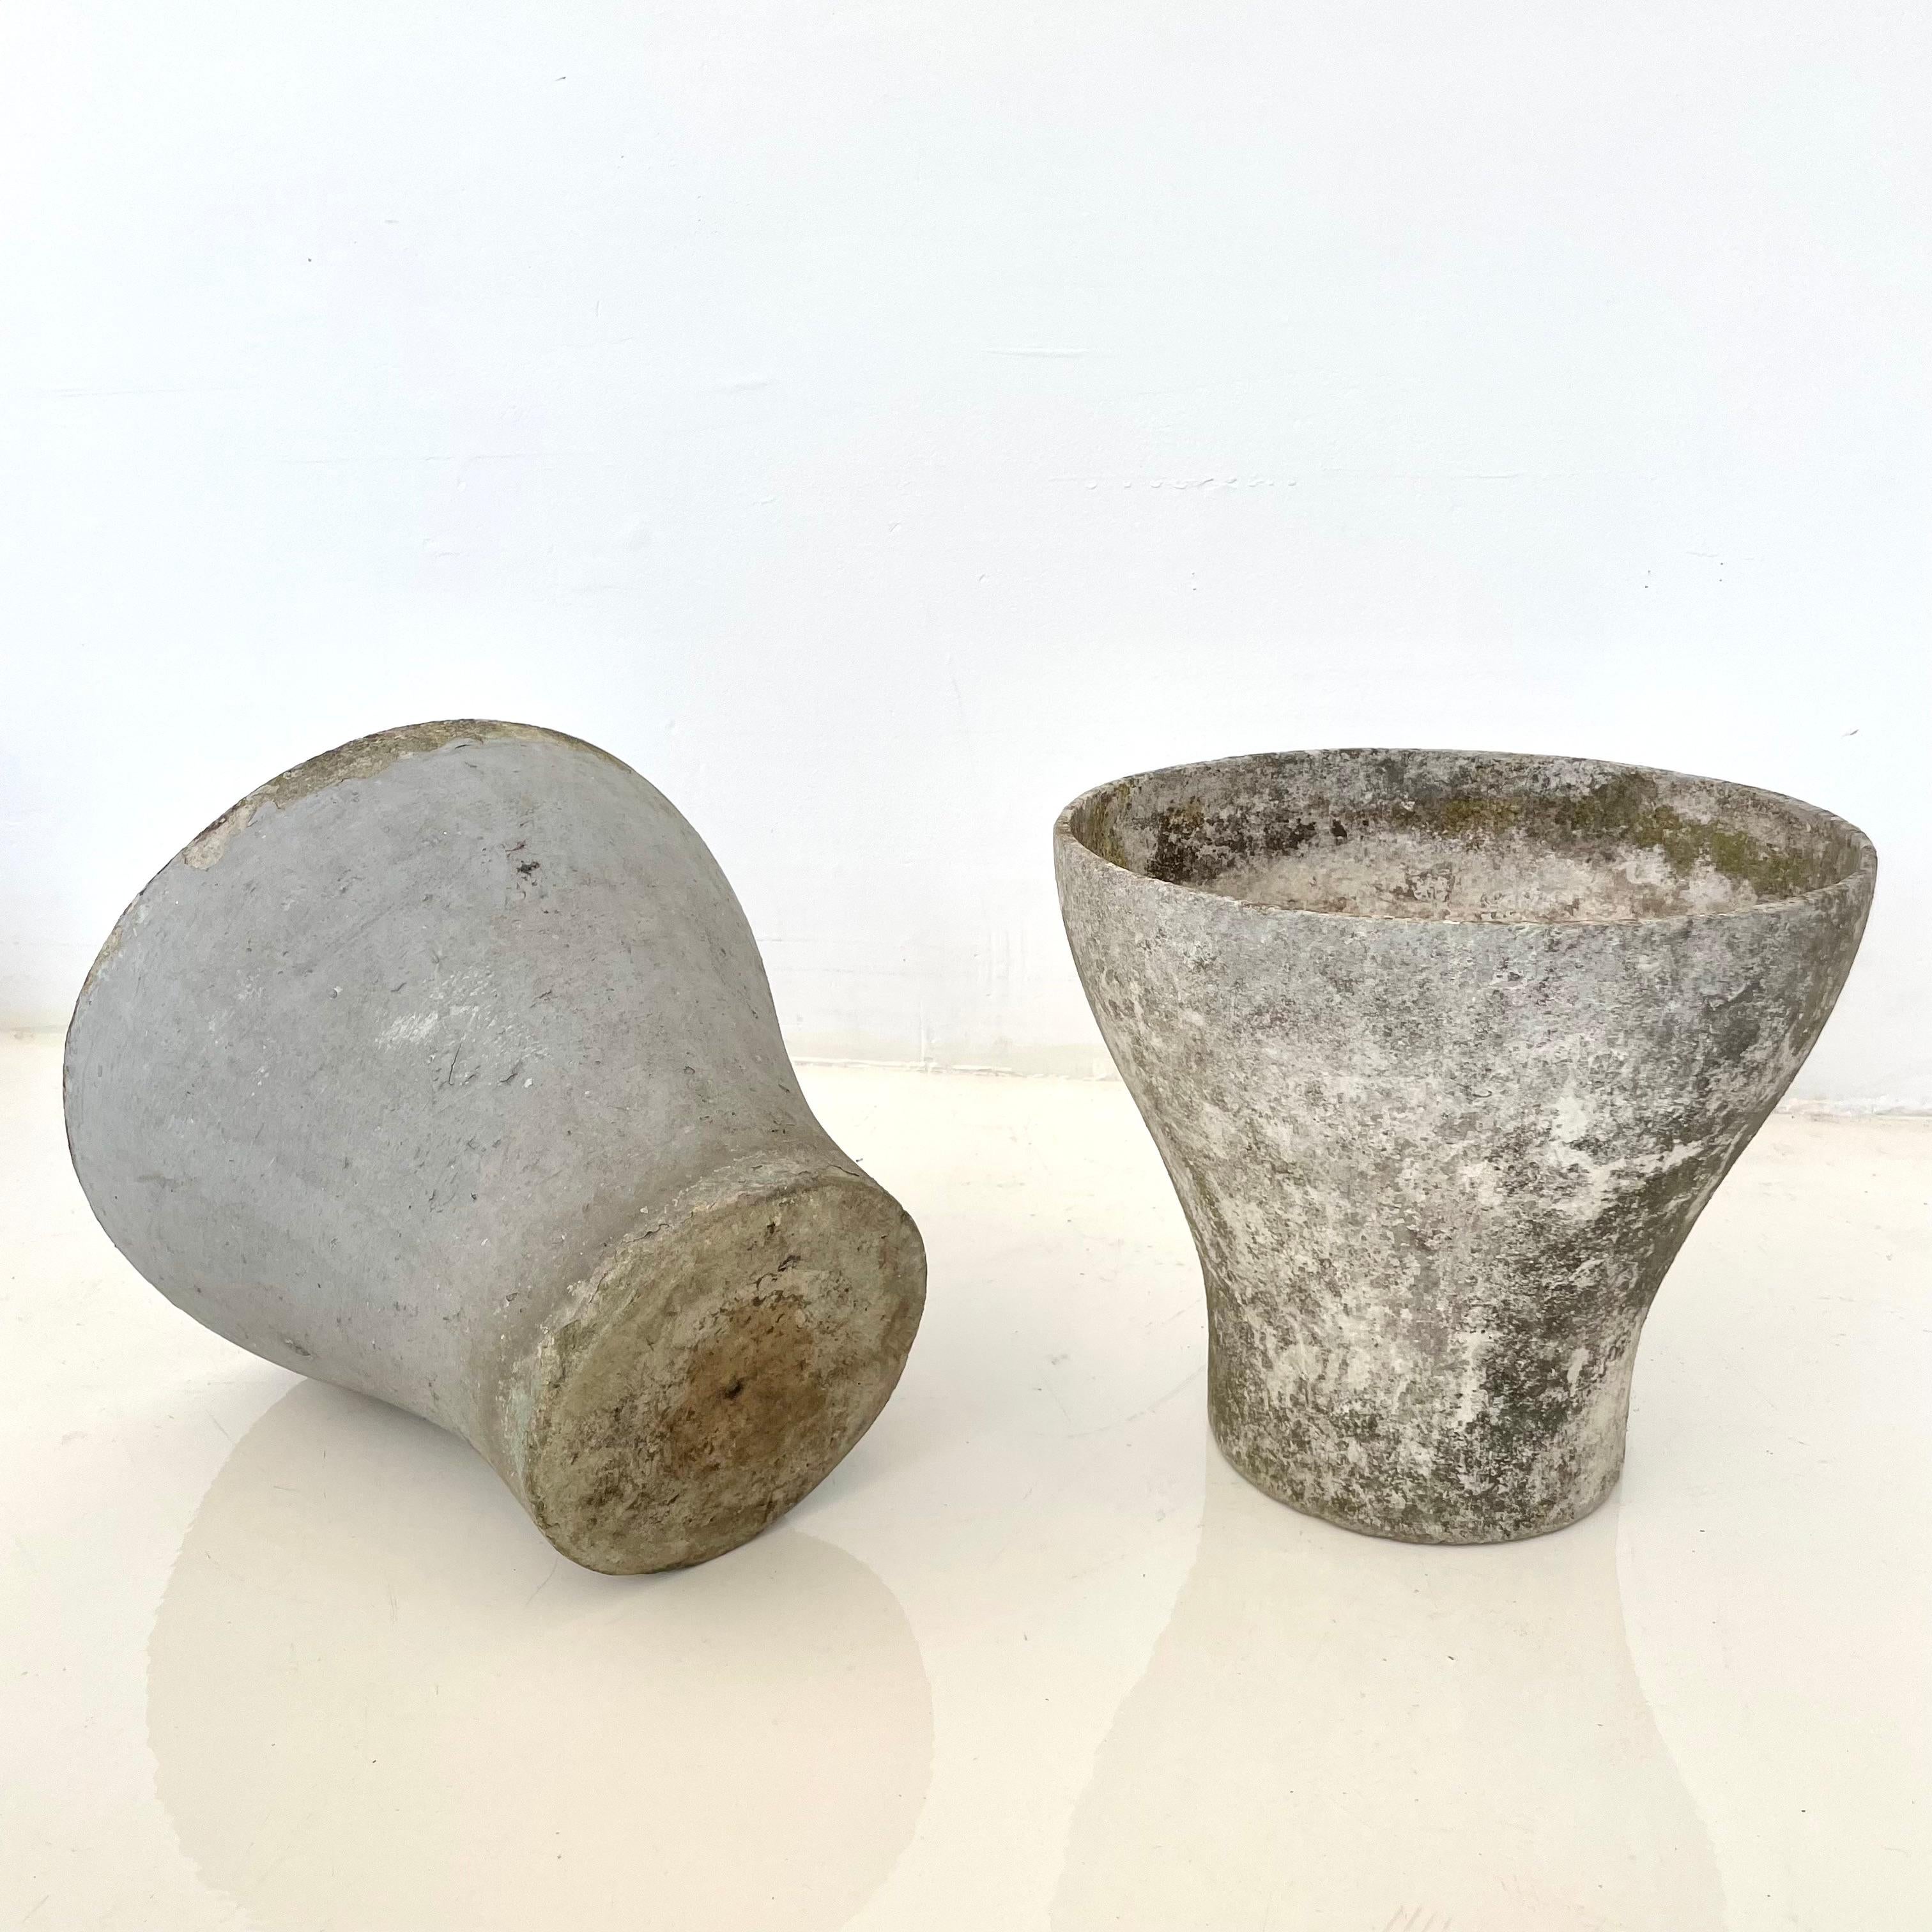 Unique concrete planter by Swiss architect Willy Guhl. Planter in the shape of a goblet or drinking cup. Excellent patina and coloring. Great scale. Two available. Priced individually. 

       






 

